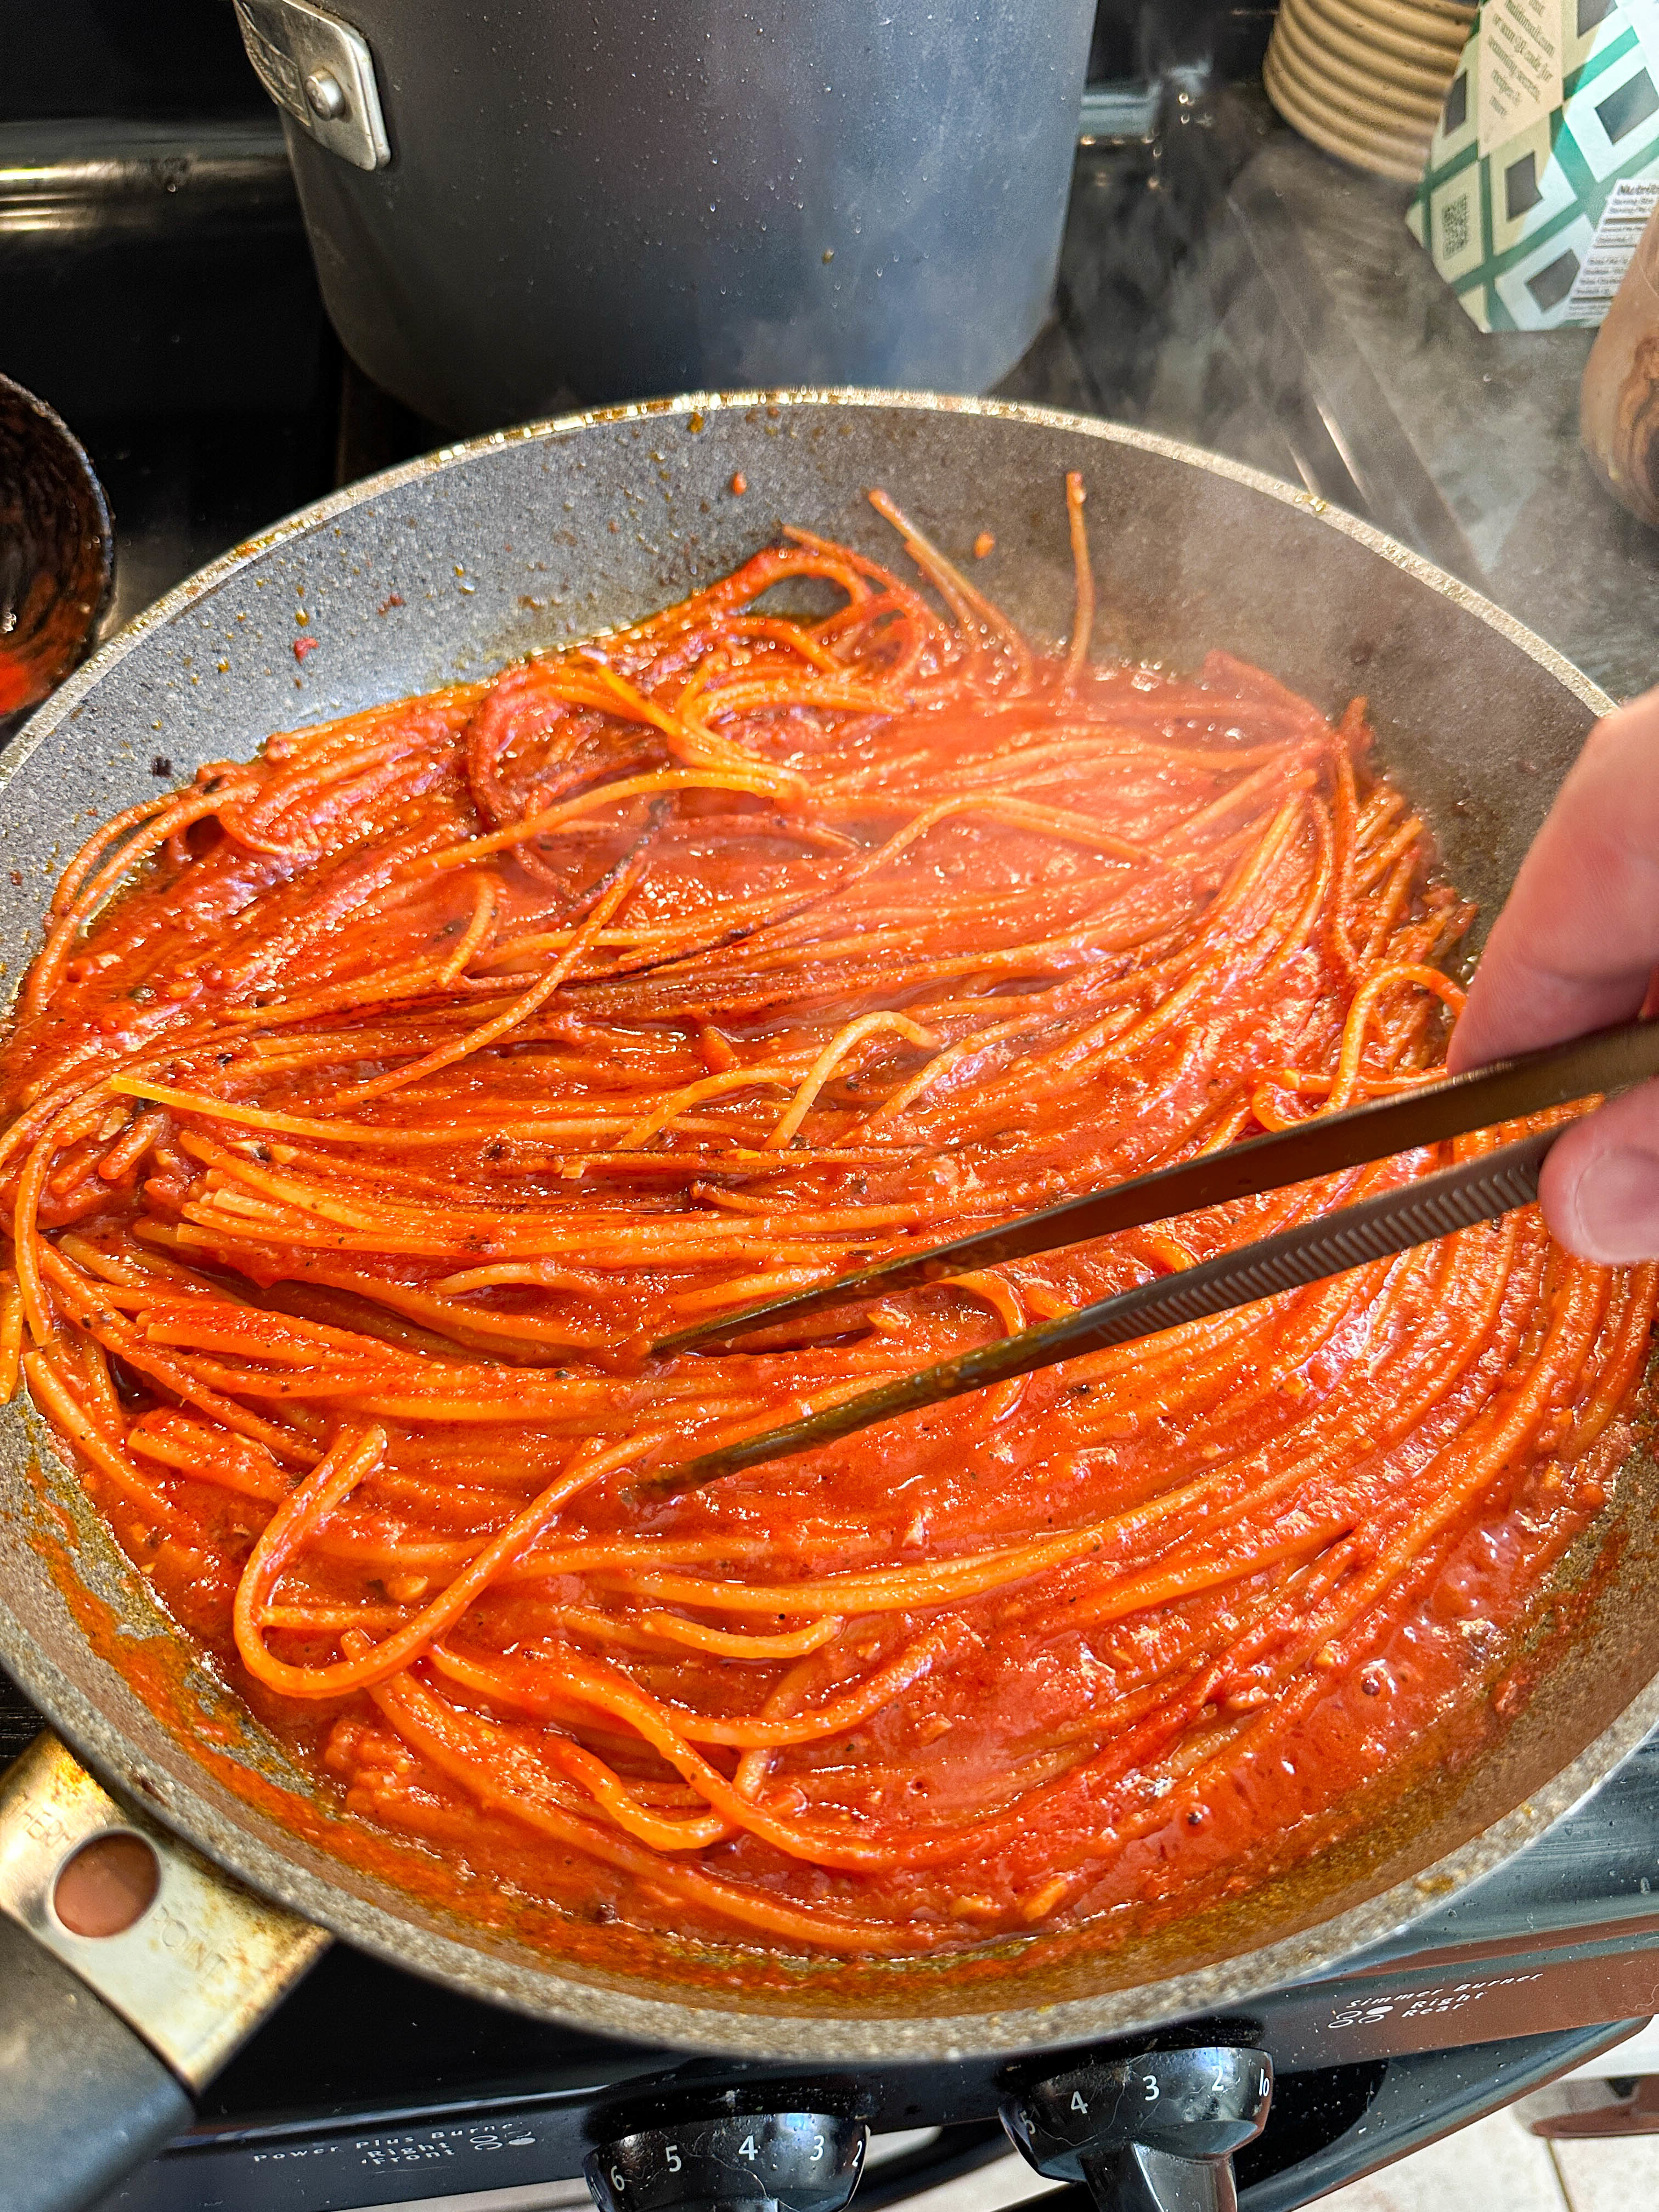 A person cooking spaghetti in tomato sauce in a pan, using tongs to stir